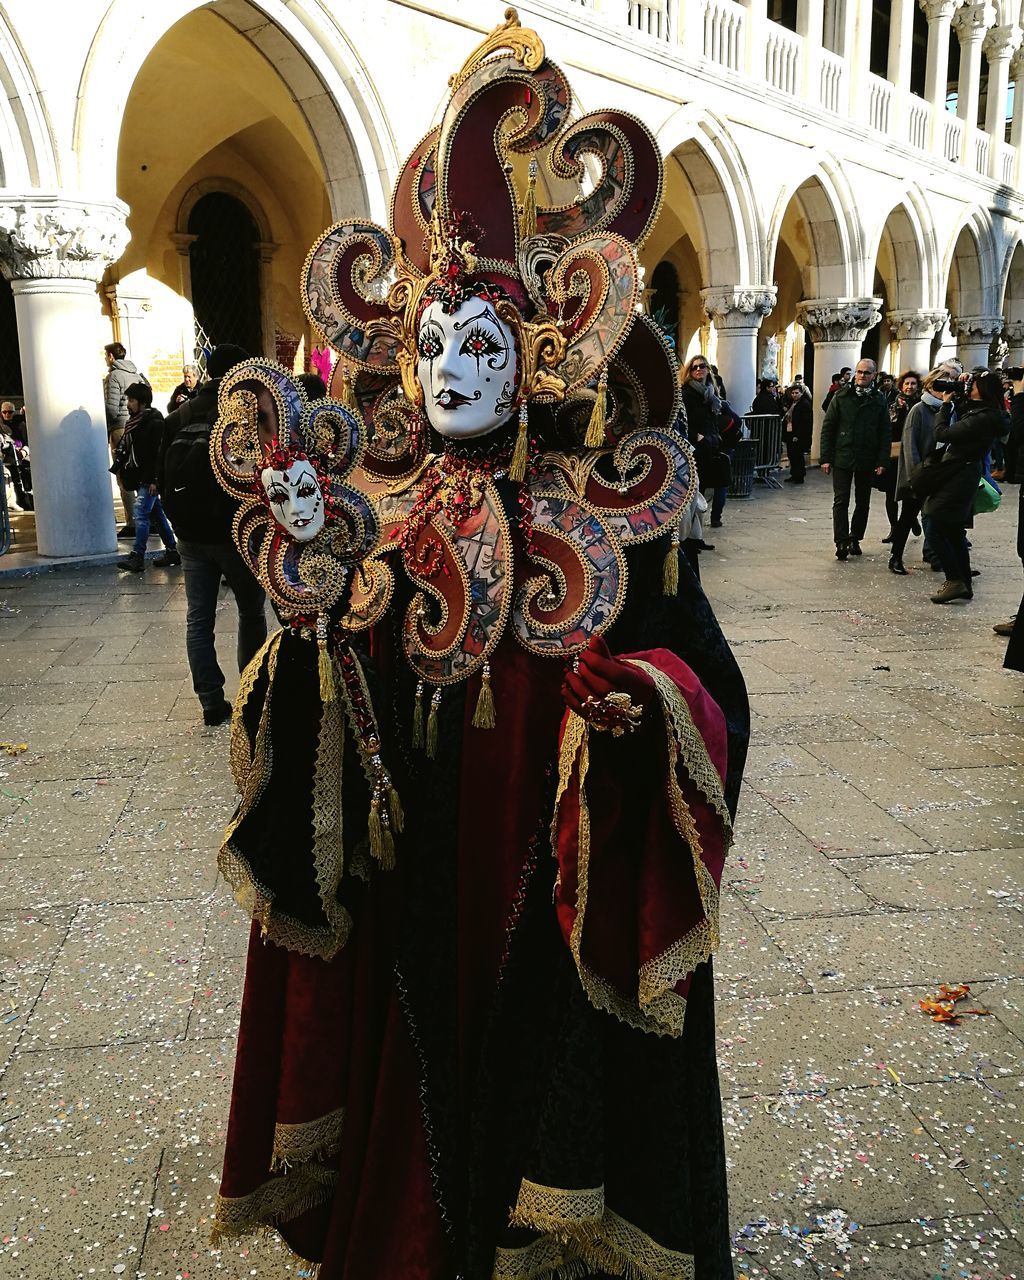 celebration, real people, parade, mask - disguise, large group of people, men, outdoors, architecture, adults only, venetian mask, people, crowd, day, adult, participant